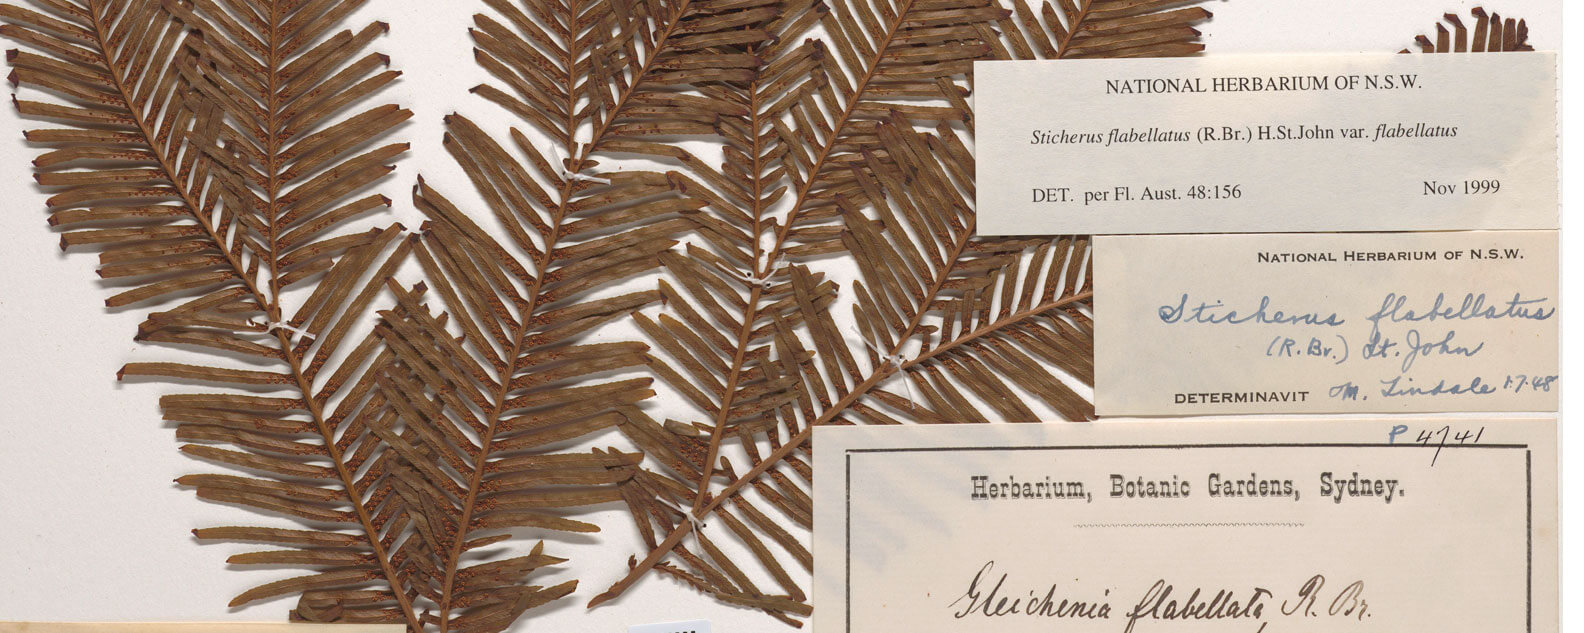 A plant specimen collected by Louise Atkinson (Calvert) with a range of historic labels